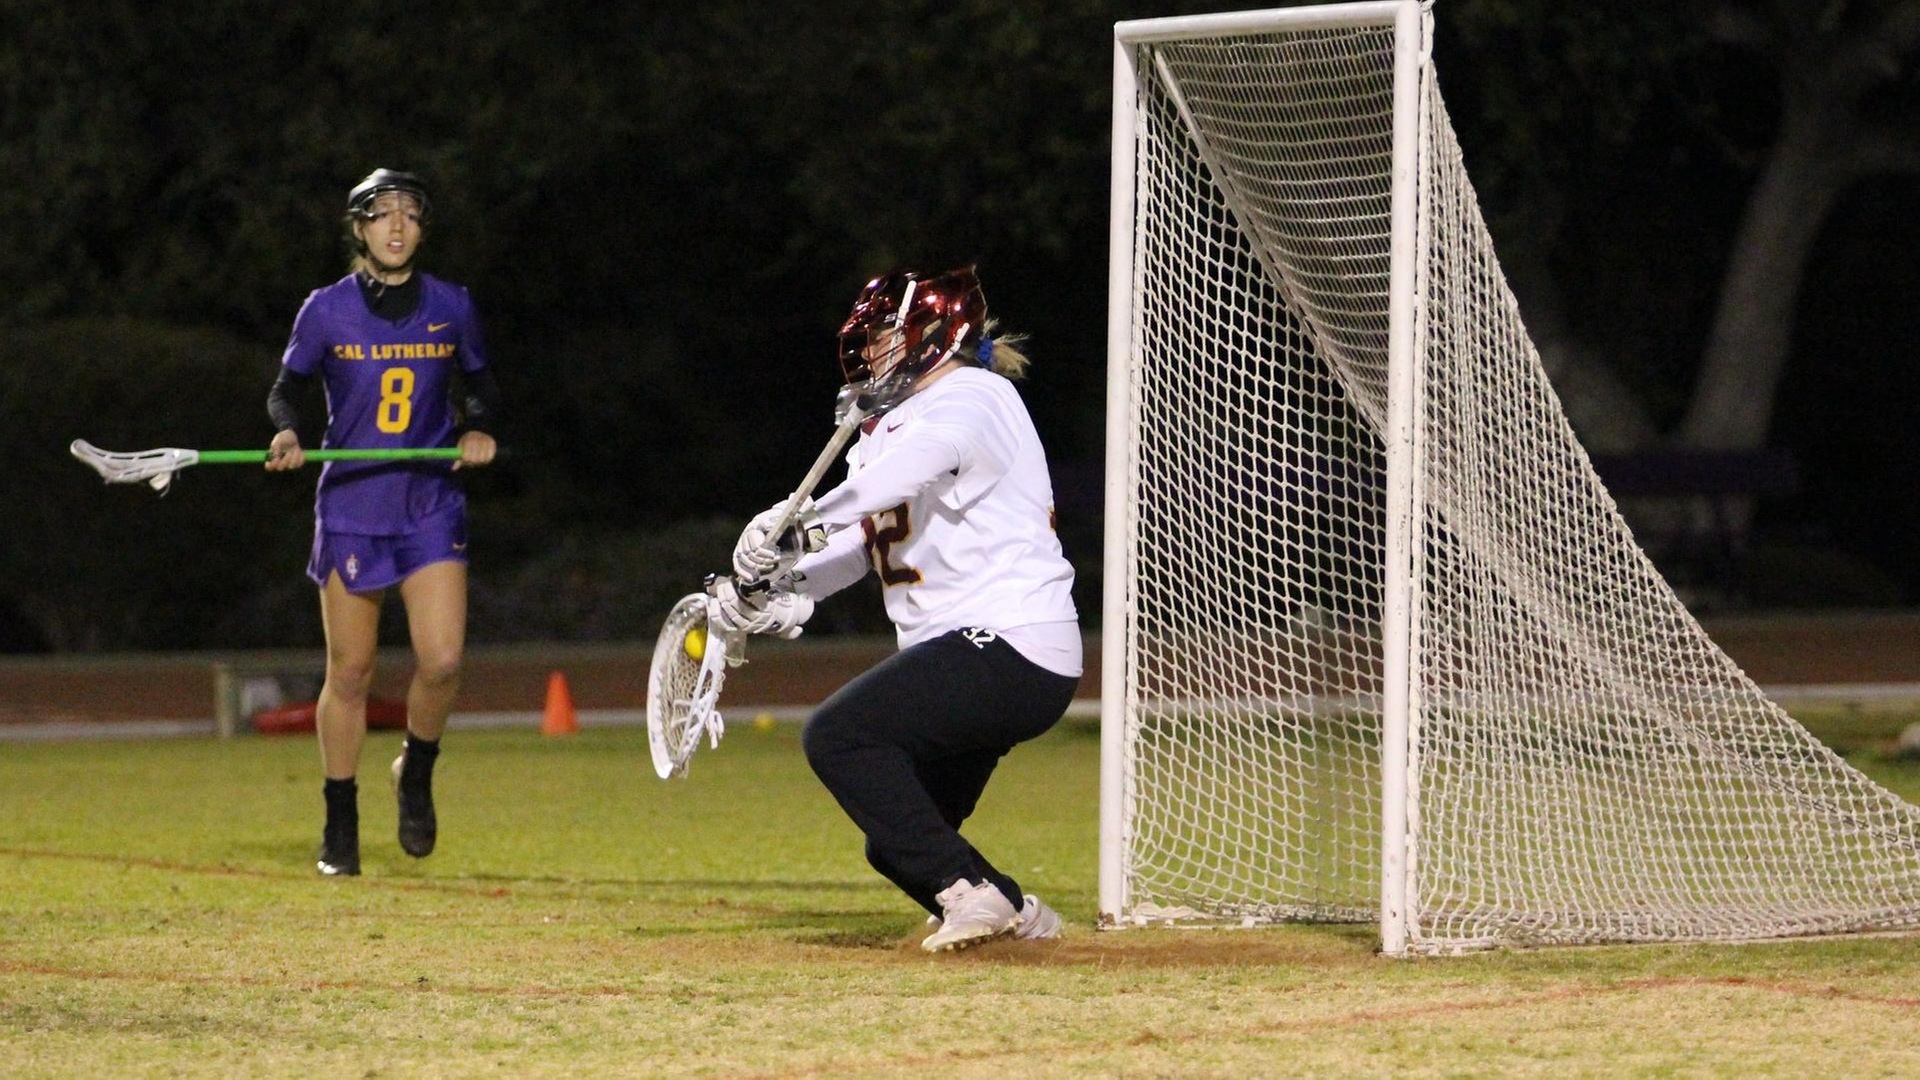 Holly Shankle preserves the shutout with a second half save (photo by Eva Fernandez)